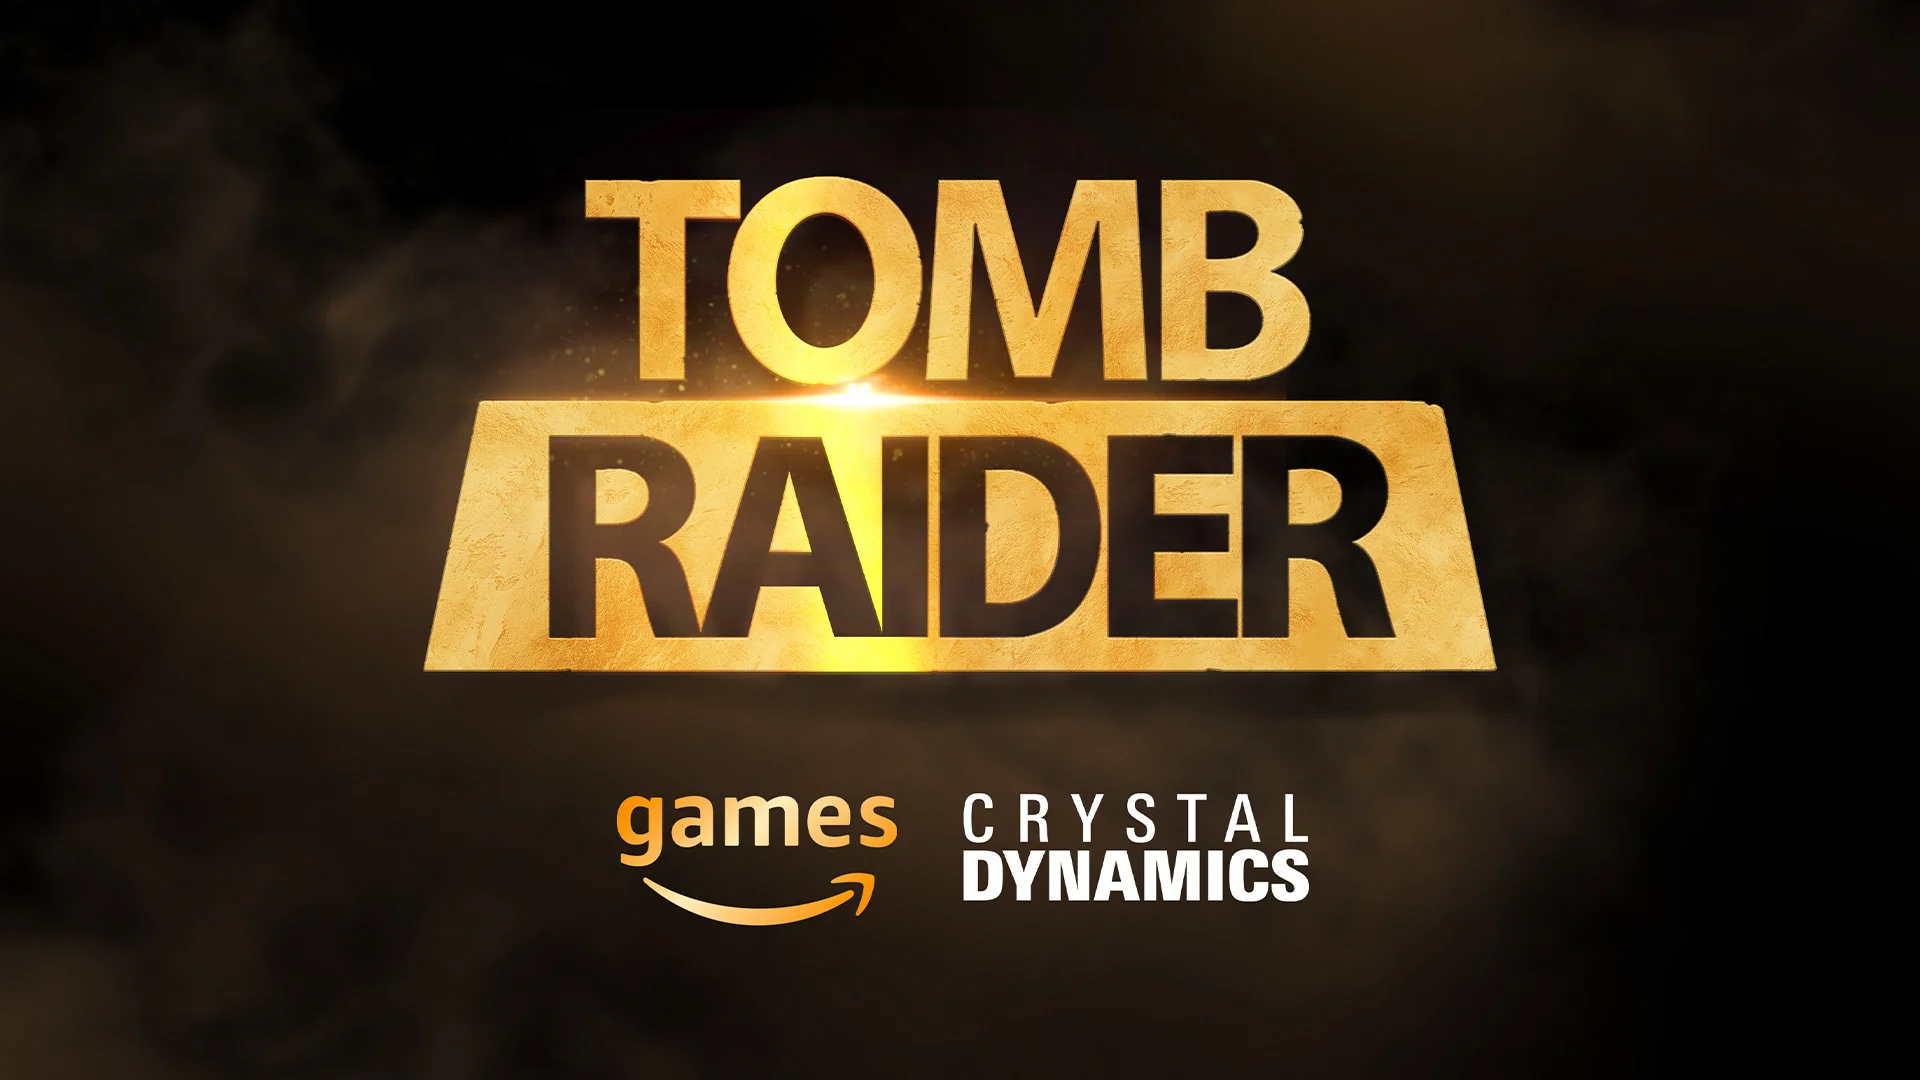 Tomb Raider Series Coming to Prime Video as Part of Crystal Dynamics/Amazon Deal